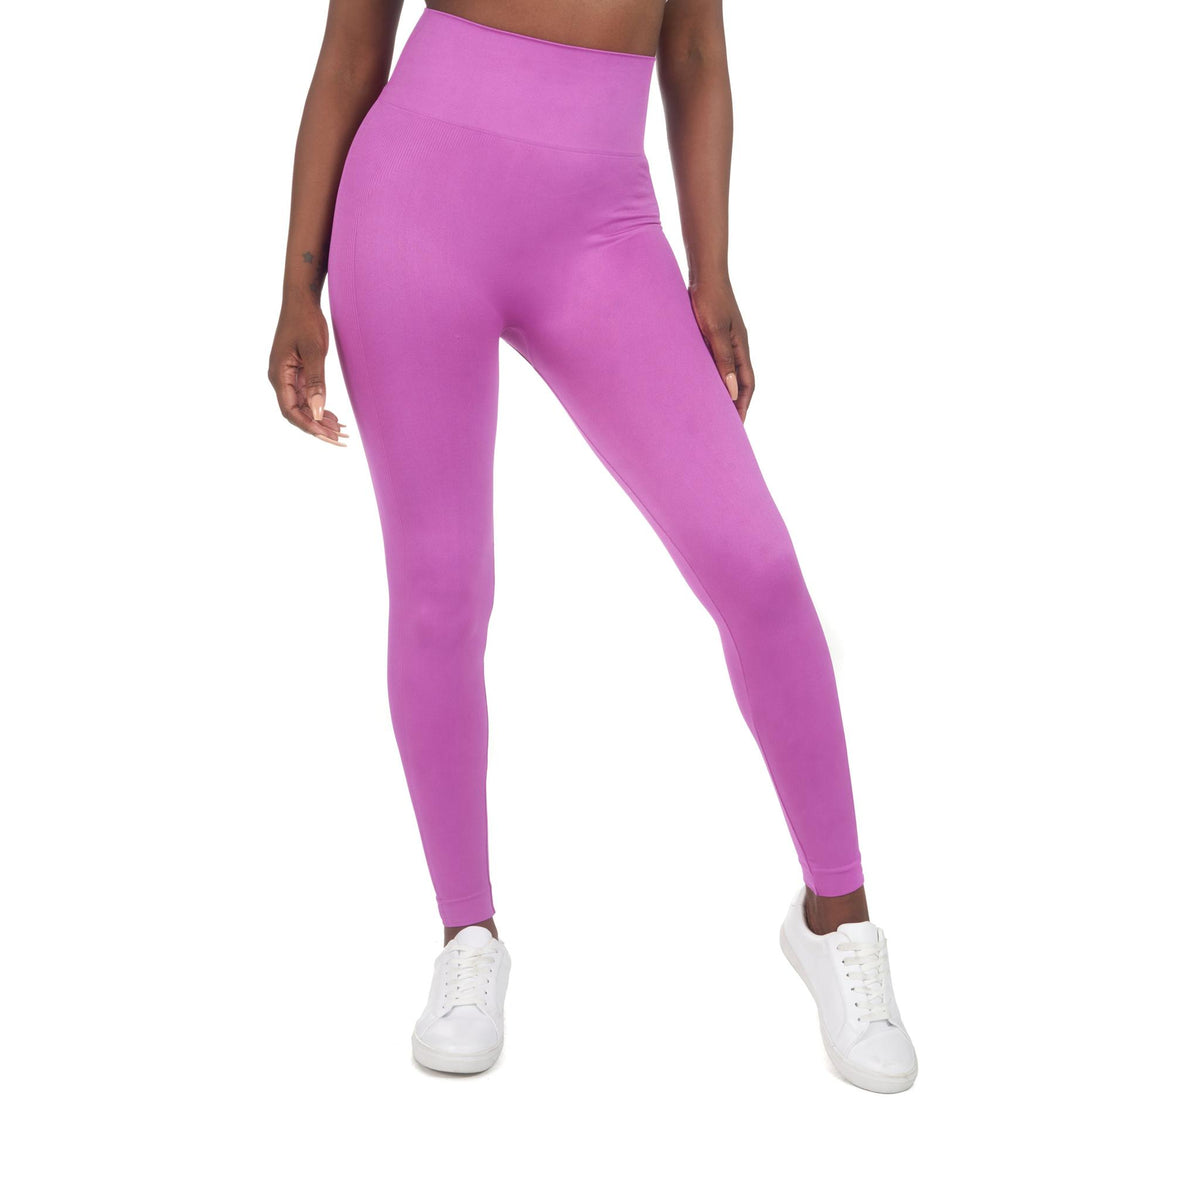  Yoga Pants for Women Pilates Skinny Lovesy Legging Print Day  Valentines Stripes Running Workout Legging Athletic Tight Pink : Sports &  Outdoors